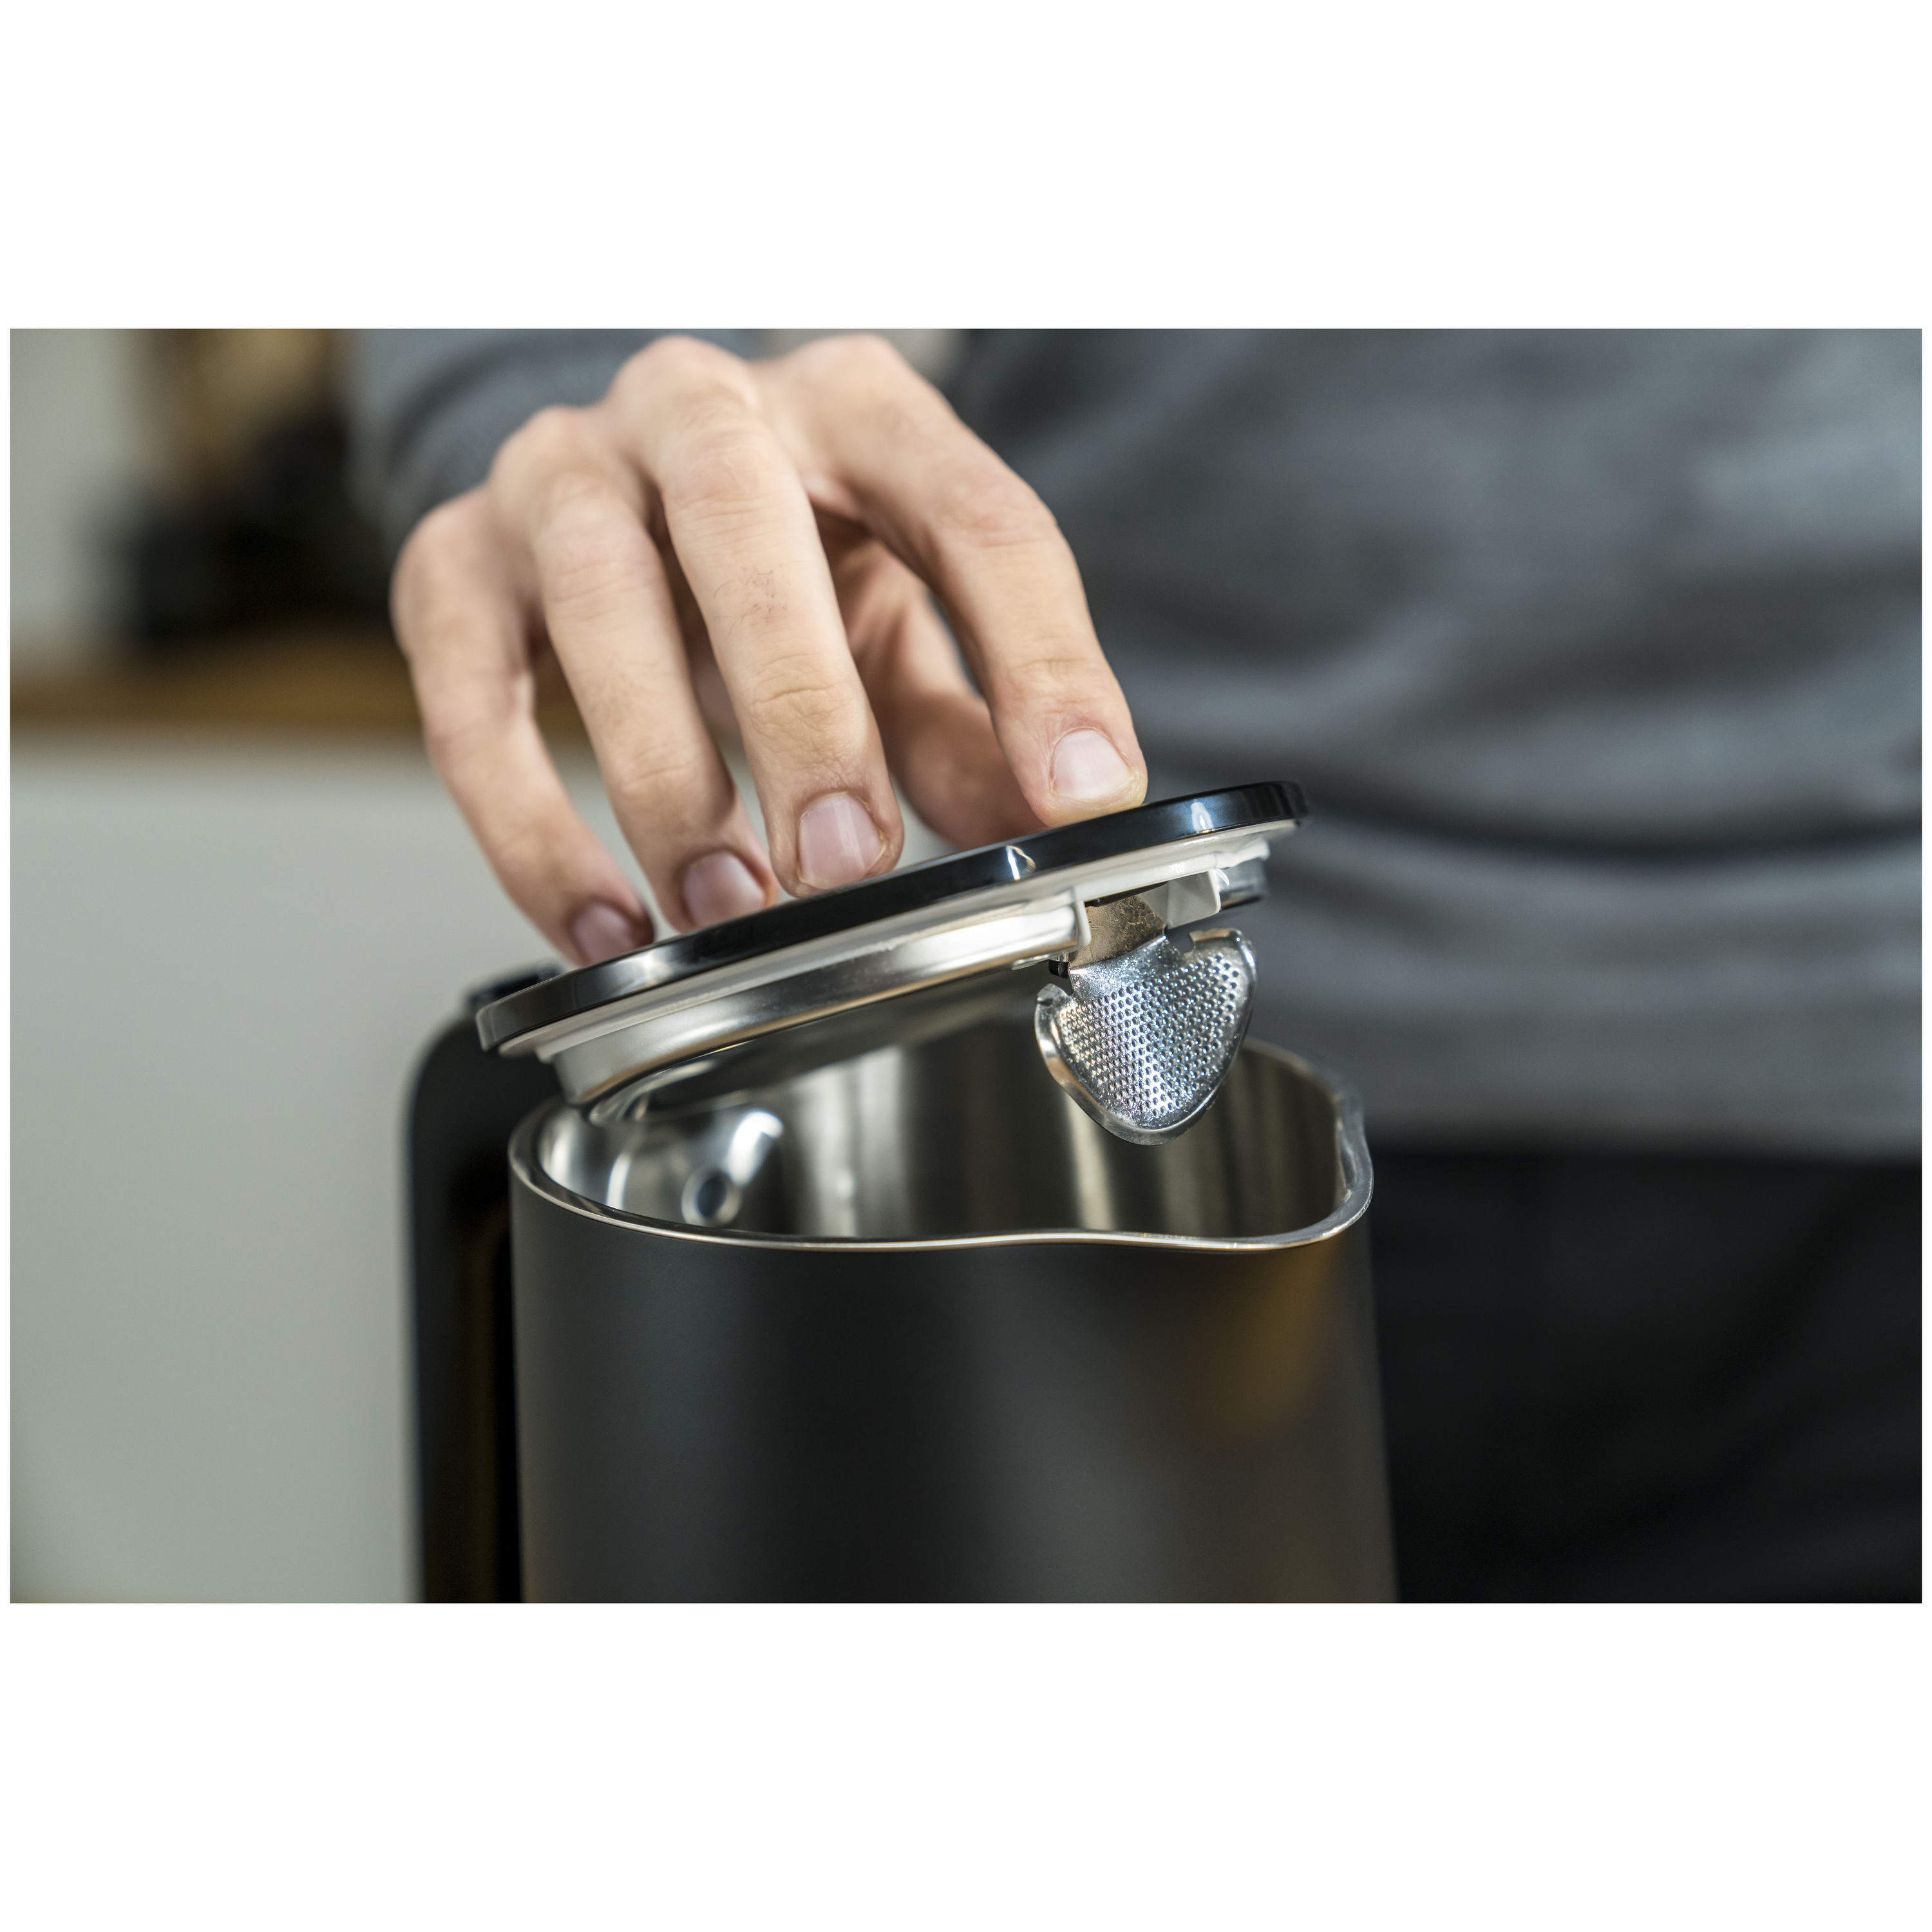 ZWILLING.COM  Electric kettle, Kettle, Stainless steel kettle